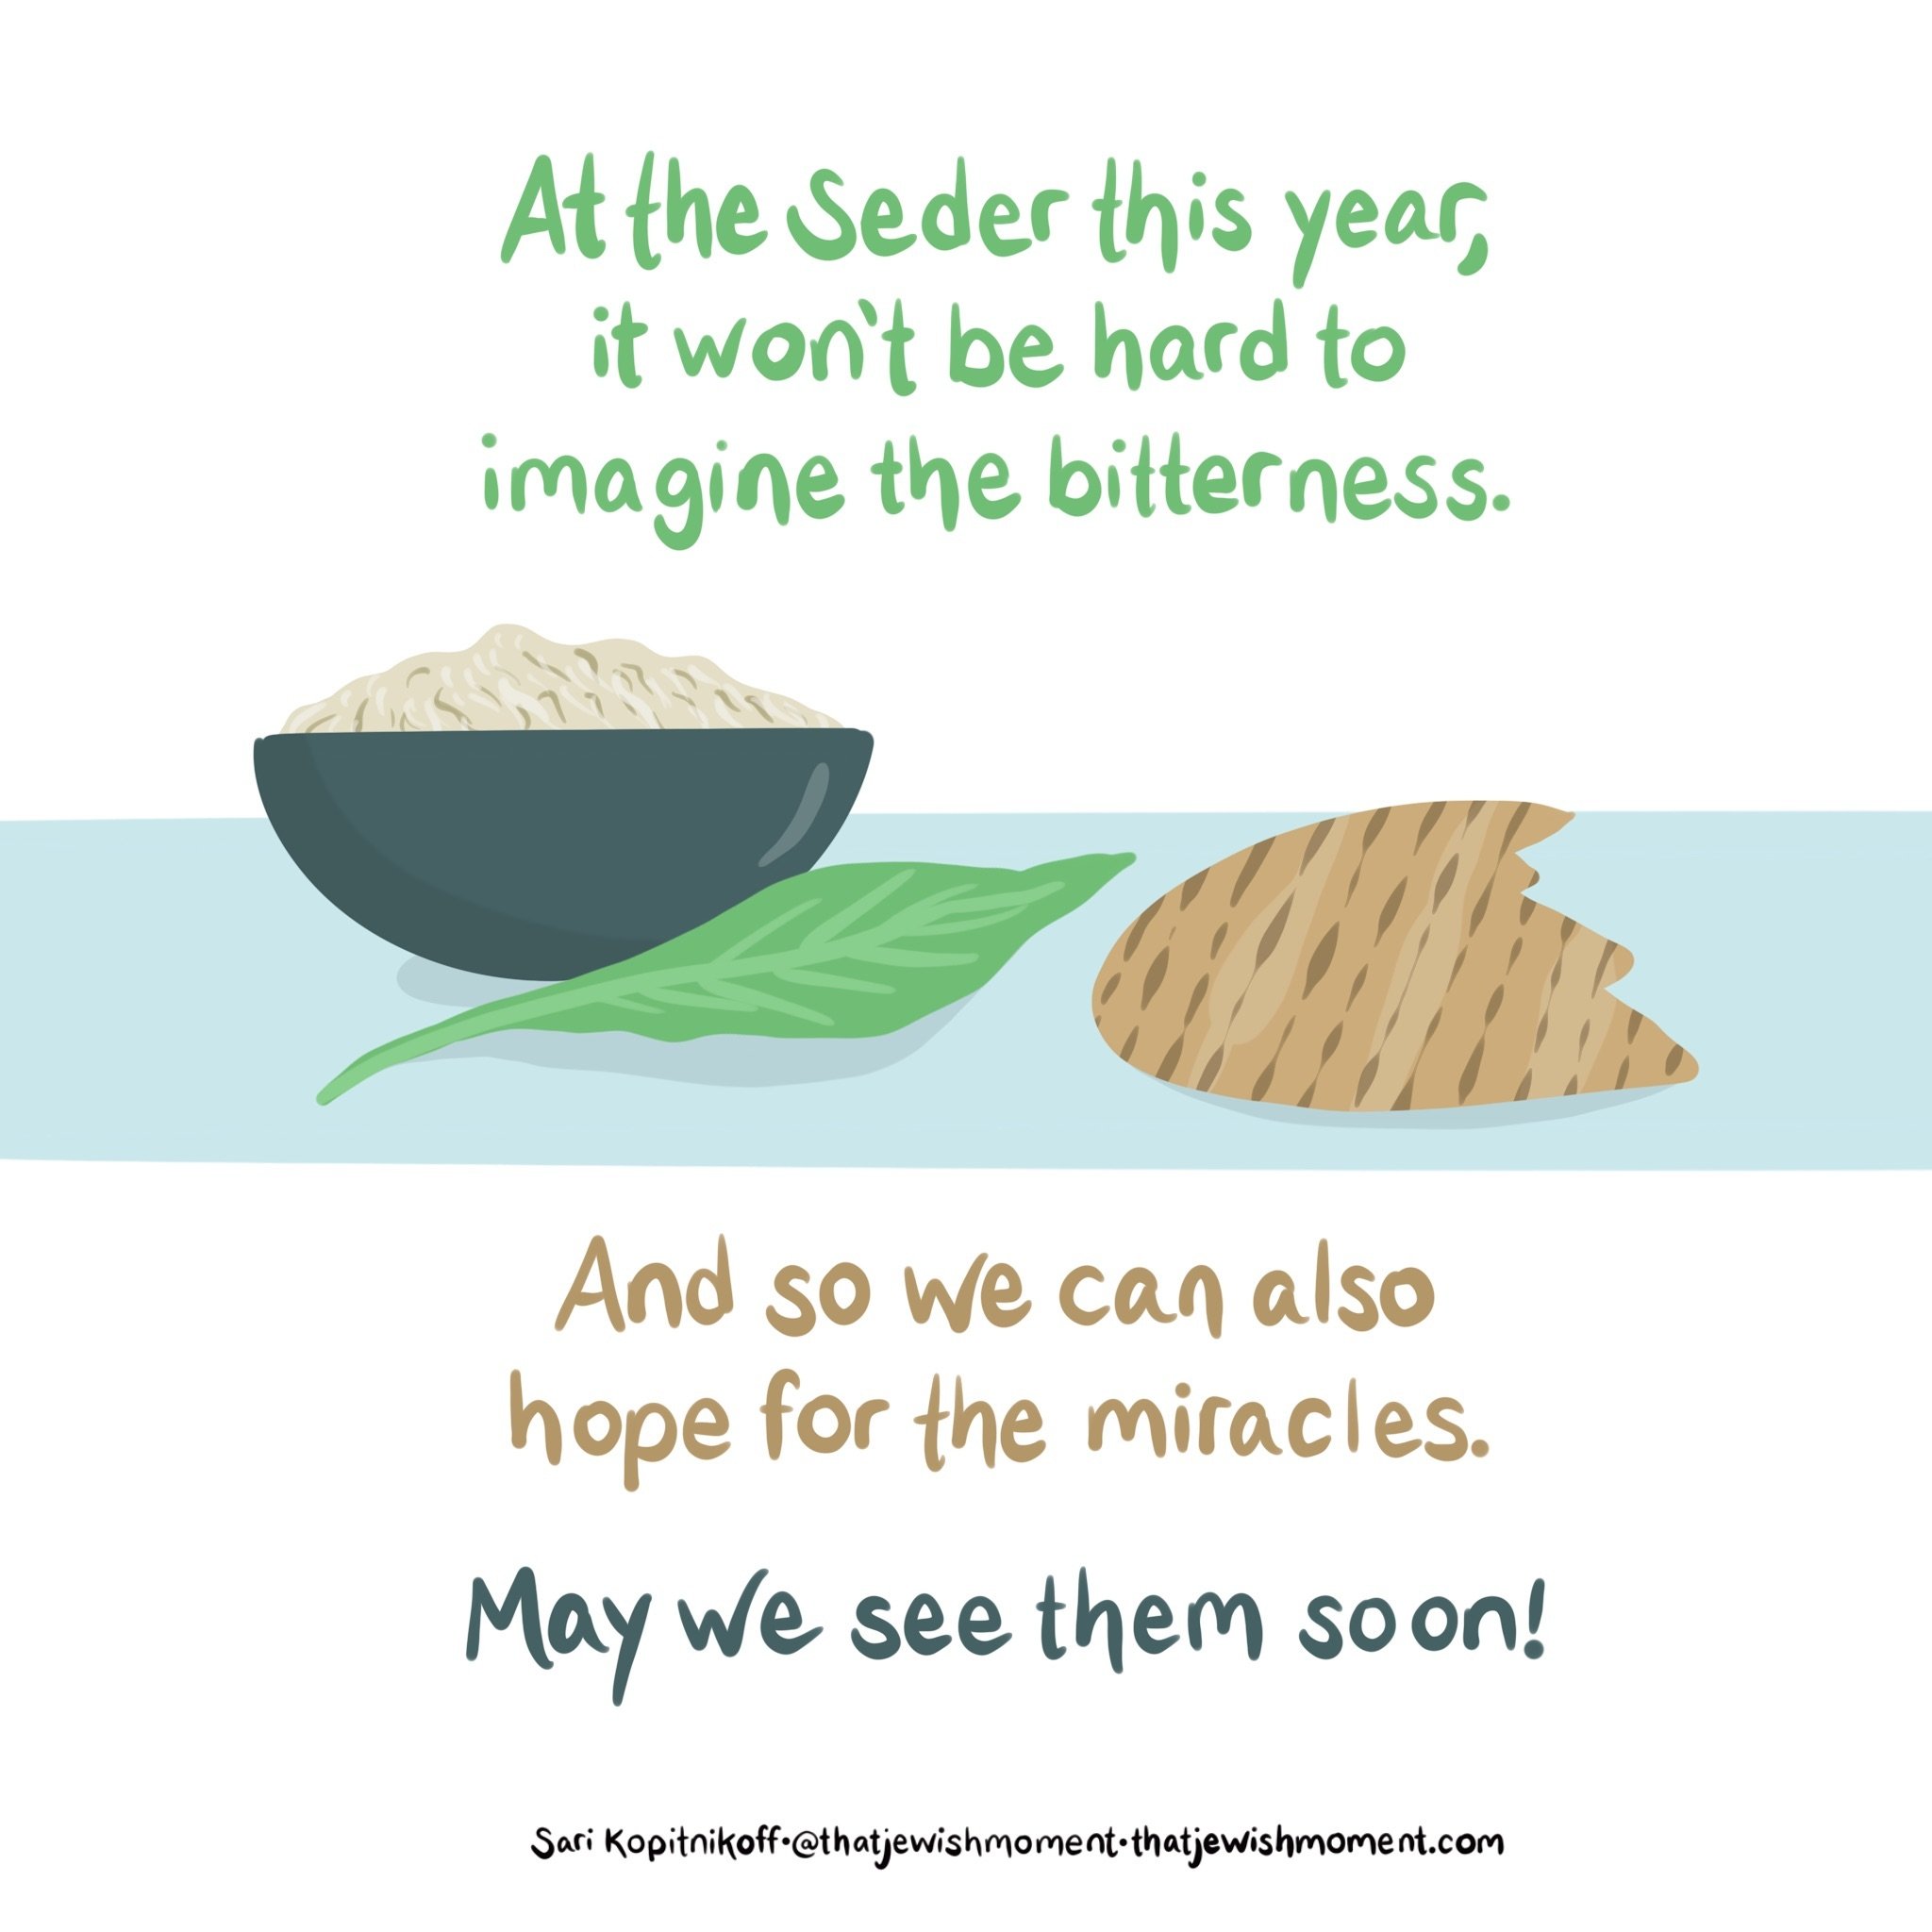 Hoping for the kind of miracle where it all happens so fast, there&rsquo;s not enough time for the dough to rise. ❤️ #chagsameach #happypassover #bringthemhomenow